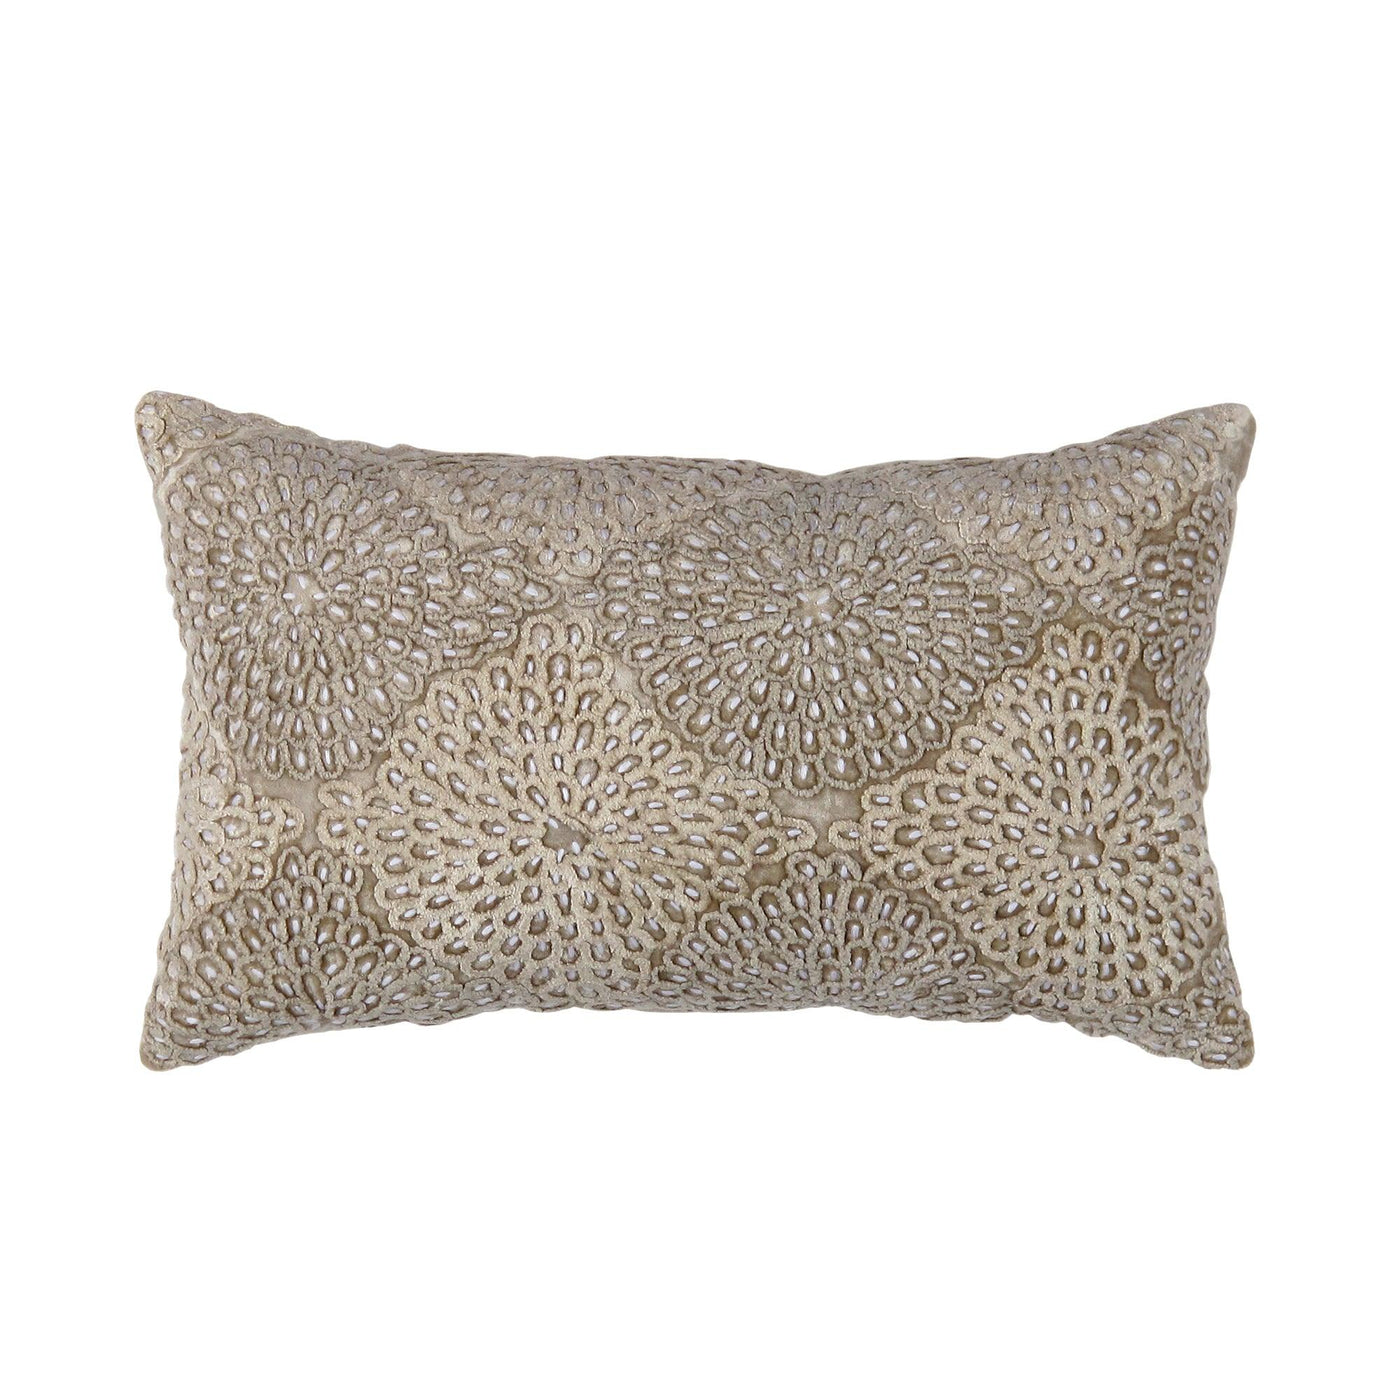 Canvello Naples Embroidered Pillow, Beige/Taupe